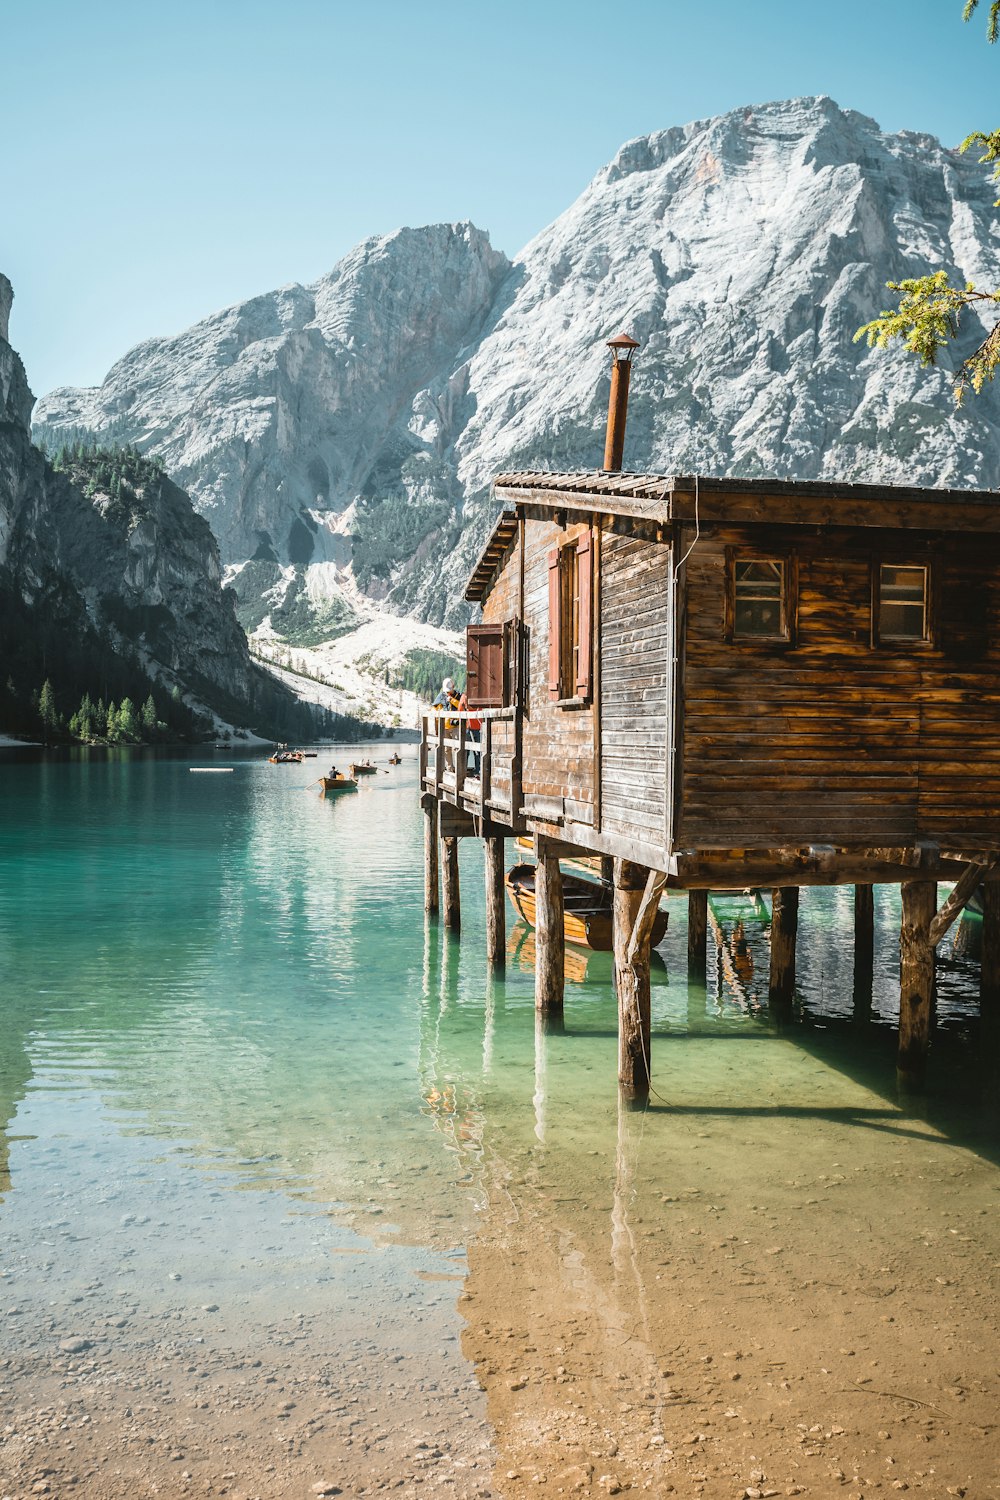 a wooden house sitting on top of a lake next to a mountain